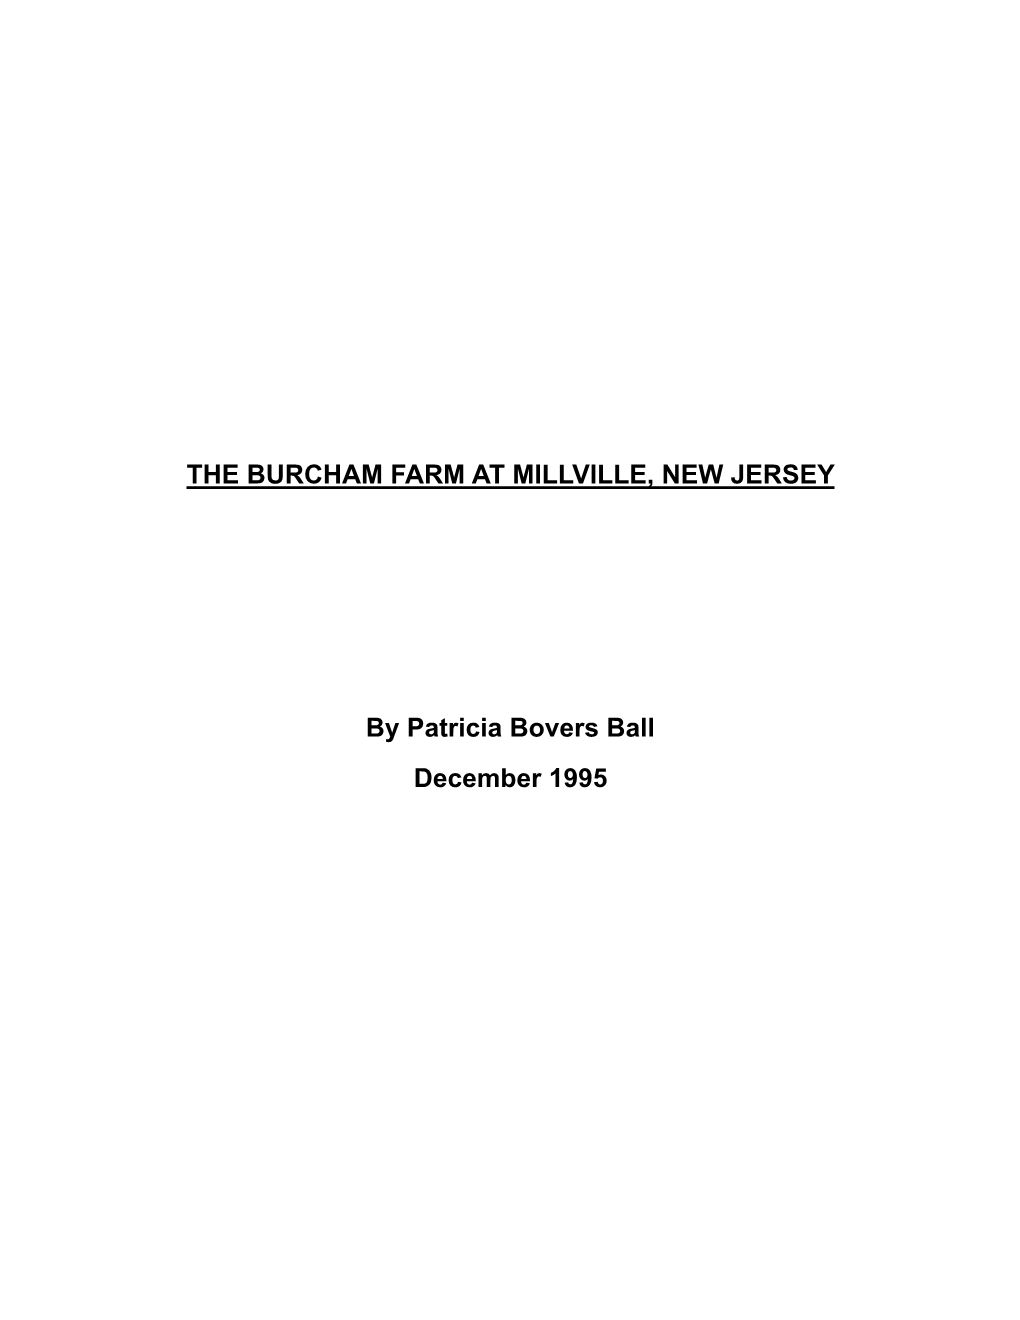 THE BURCHAM FARM at MILLVILLE, NEW JERSEY by Patricia Bovers